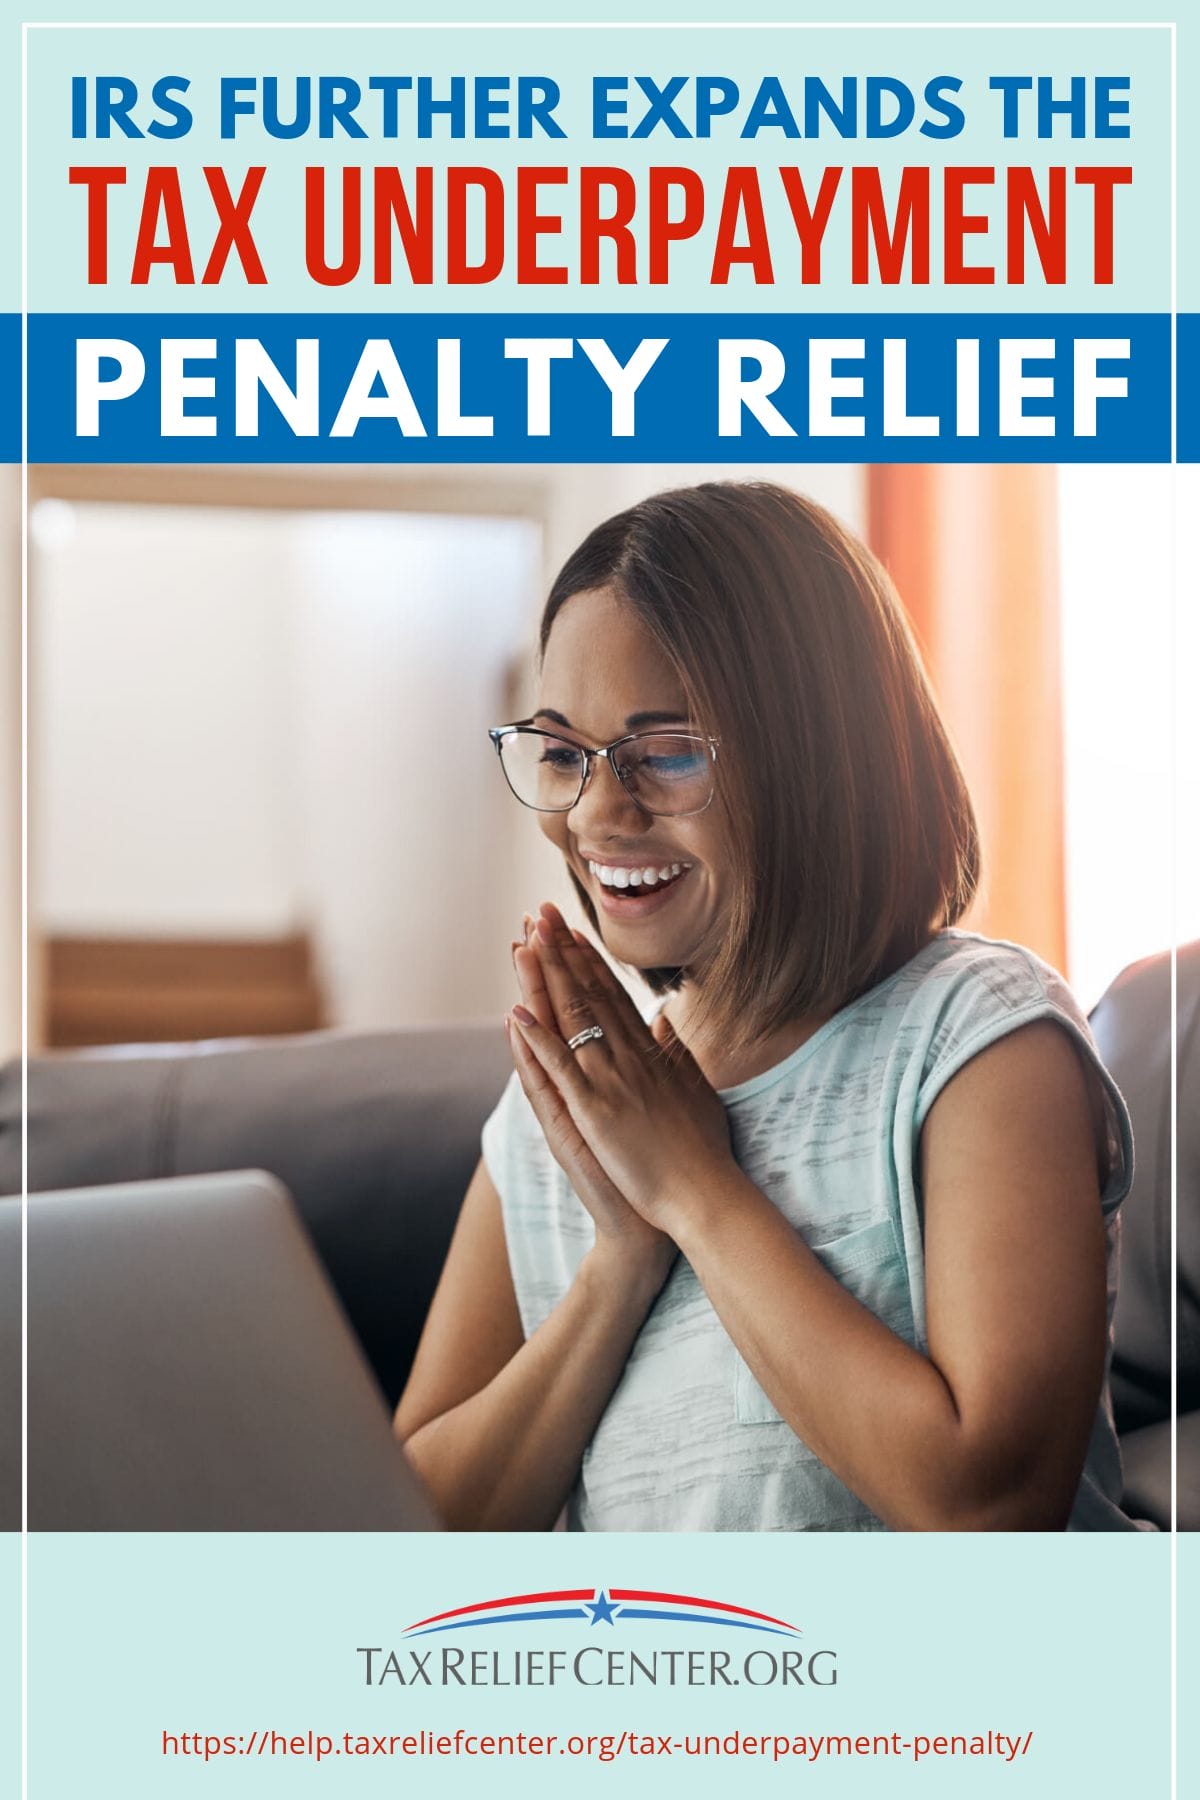 IRS Further Expands The Tax Underpayment Penalty Relief https://help.taxreliefcenter.org/tax-underpayment-penalty/